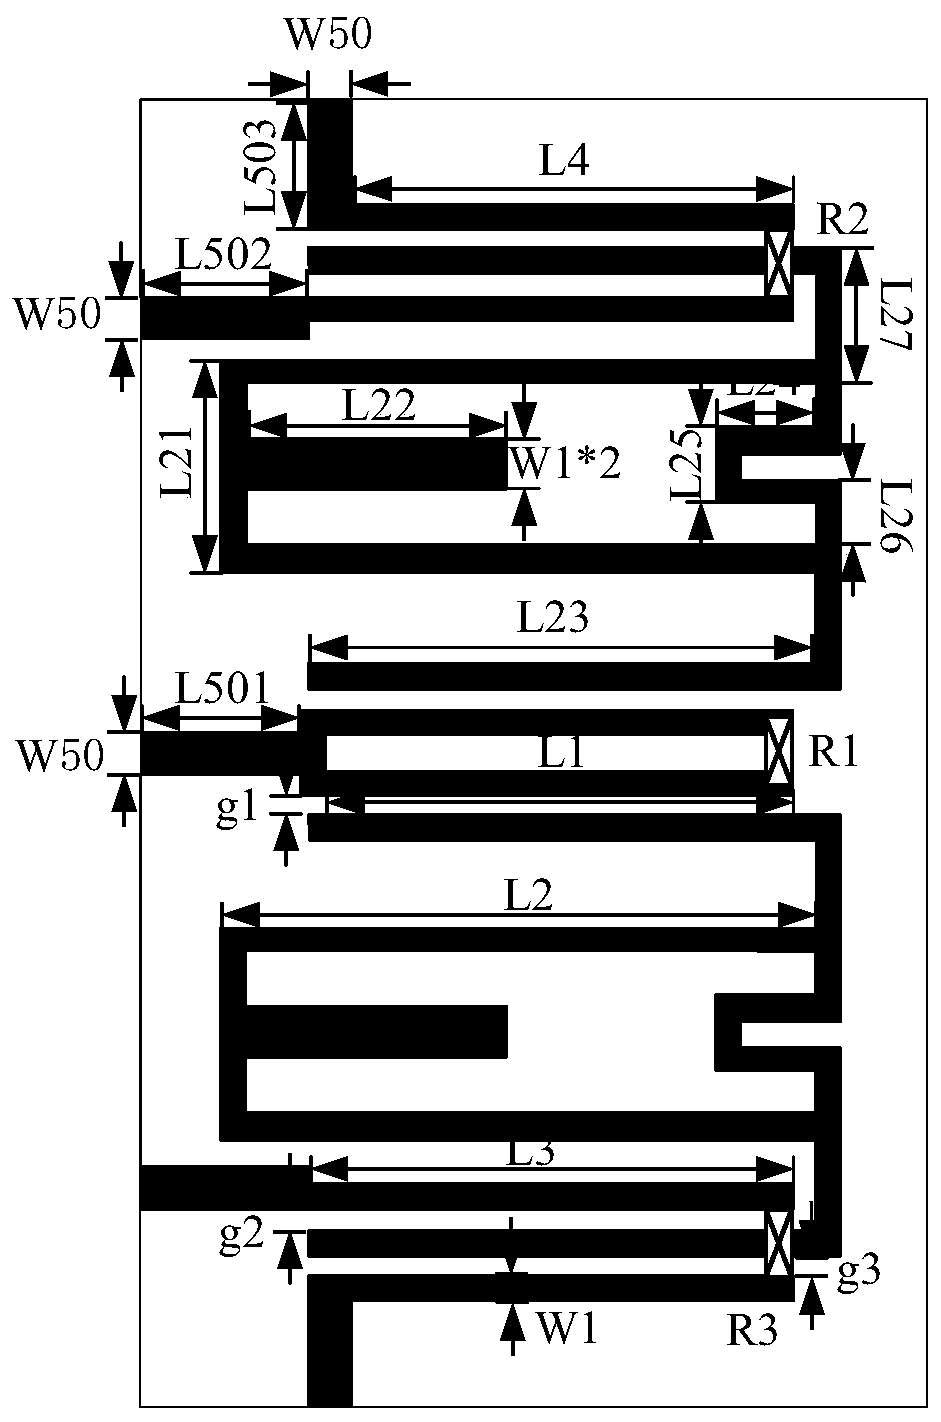 A New Type of High Performance Dual-Passband Four Power Division Filter